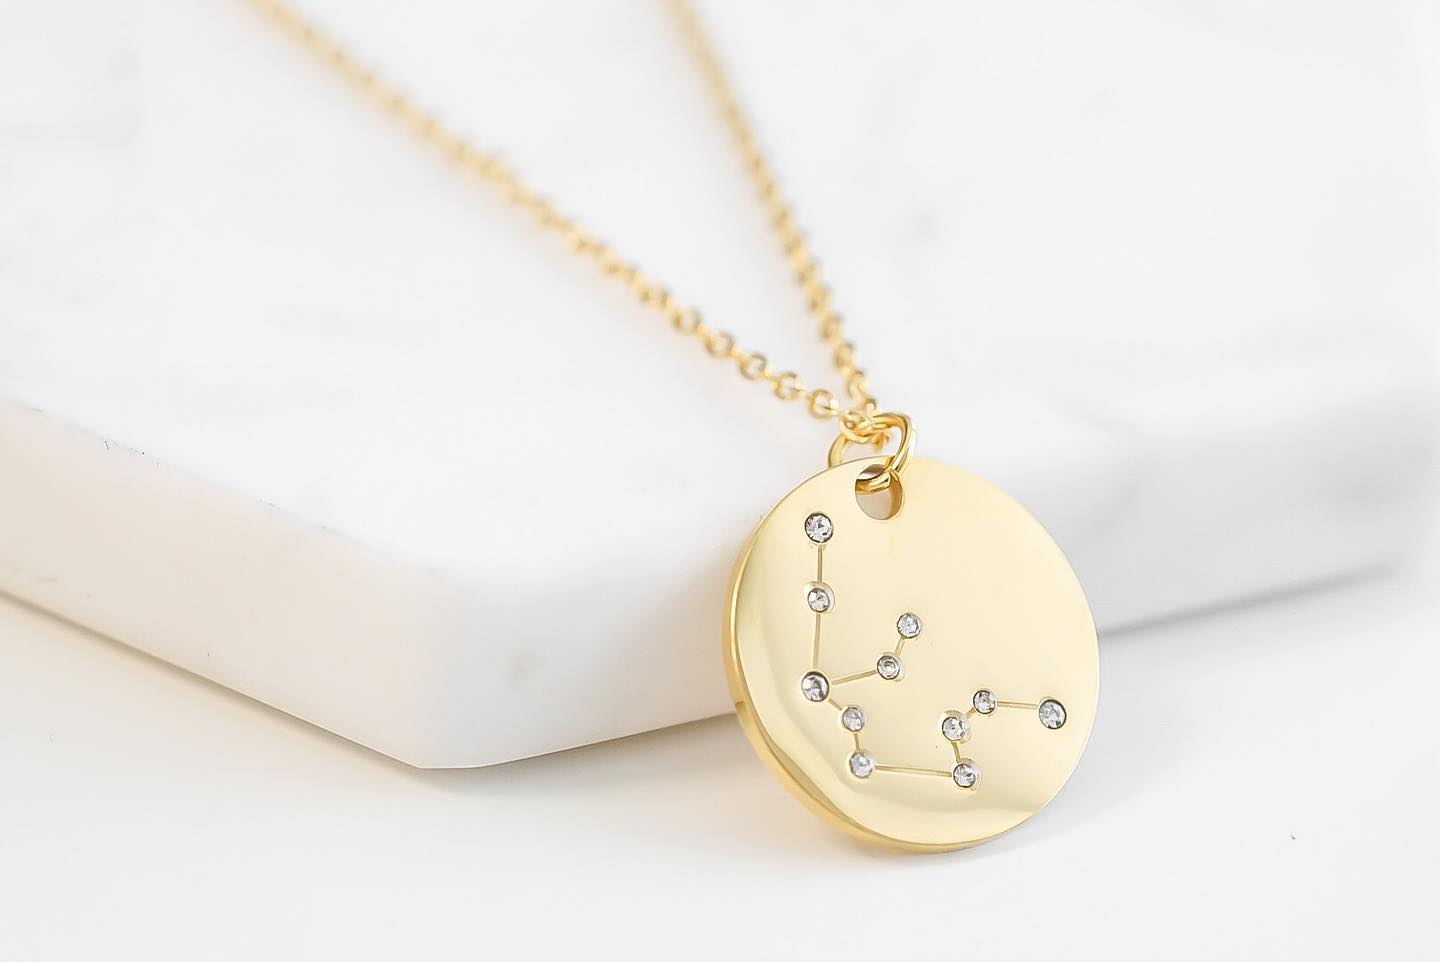 Stainless Steel Zodiac Constellation Emblem Cocktail Party Statement Pendant Necklace